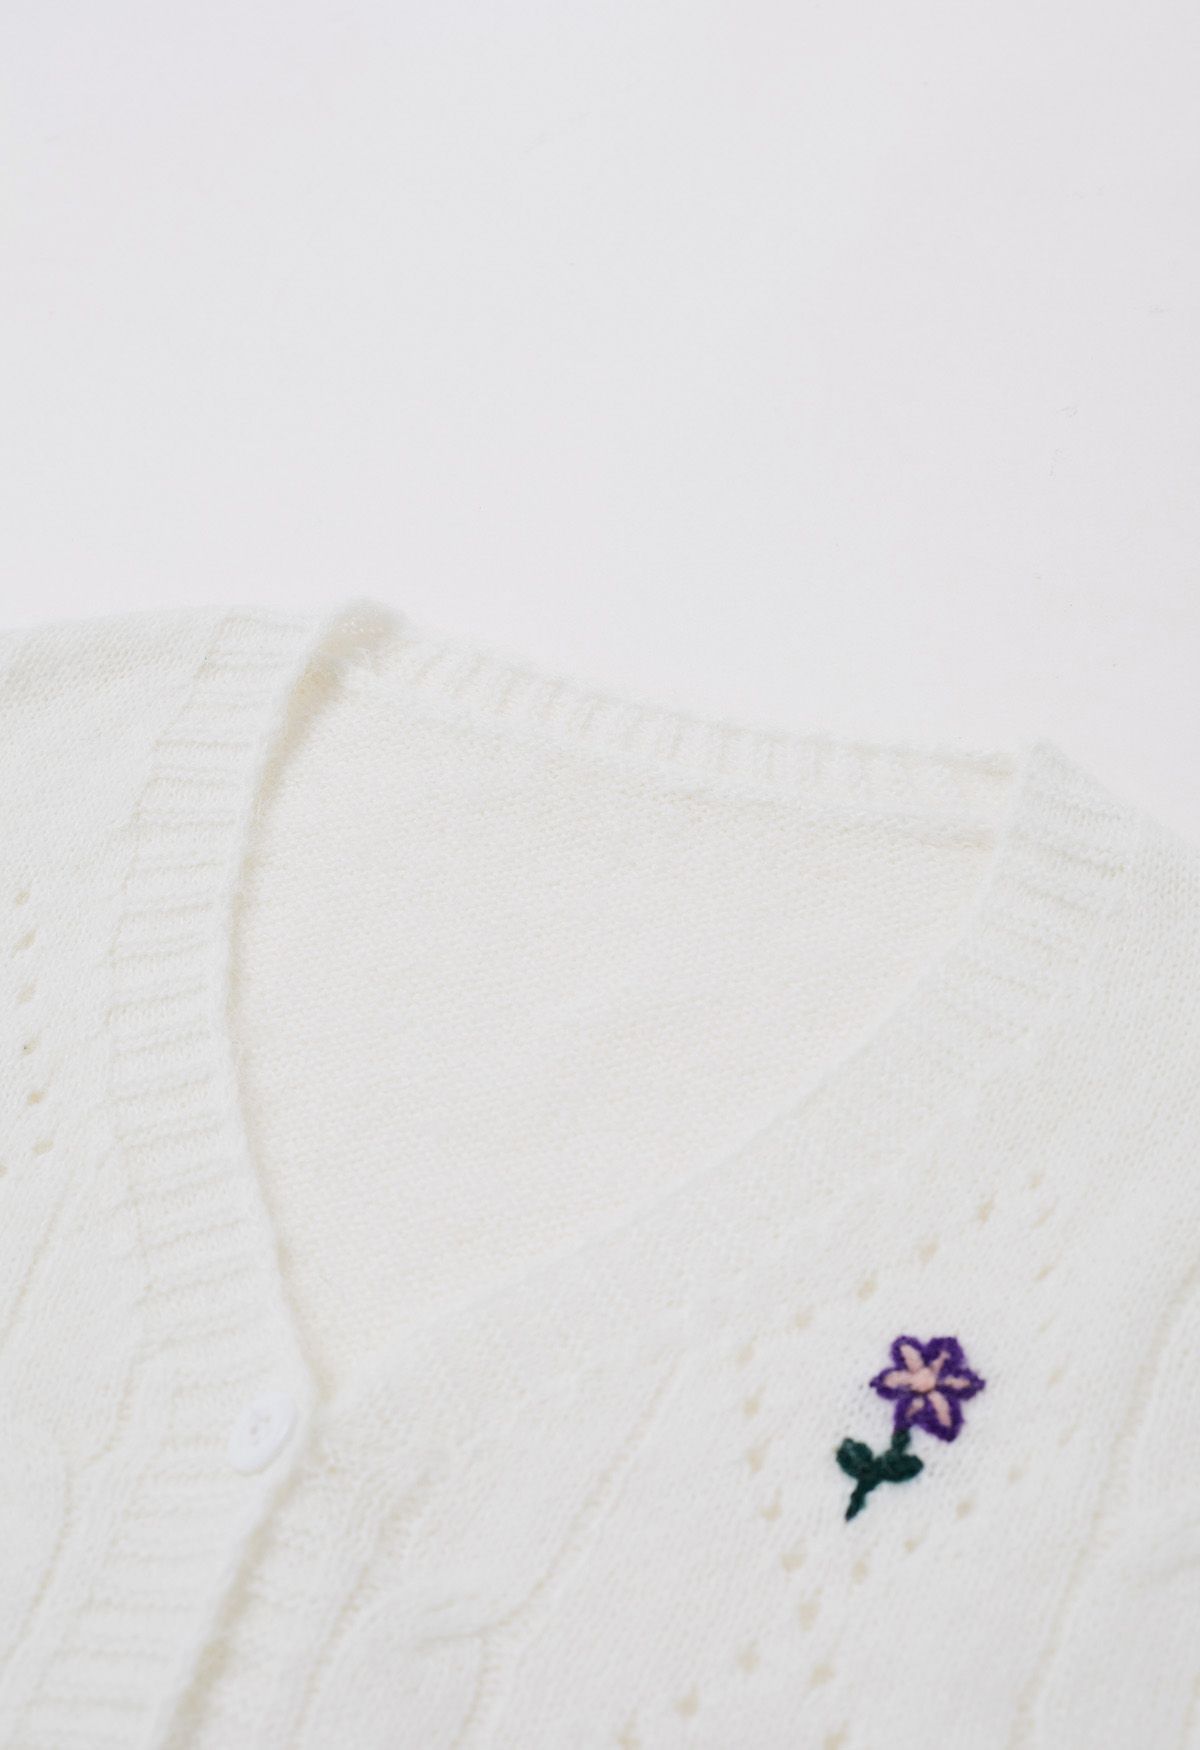 Dainty Floret Pointelle Knit Cardigan in White